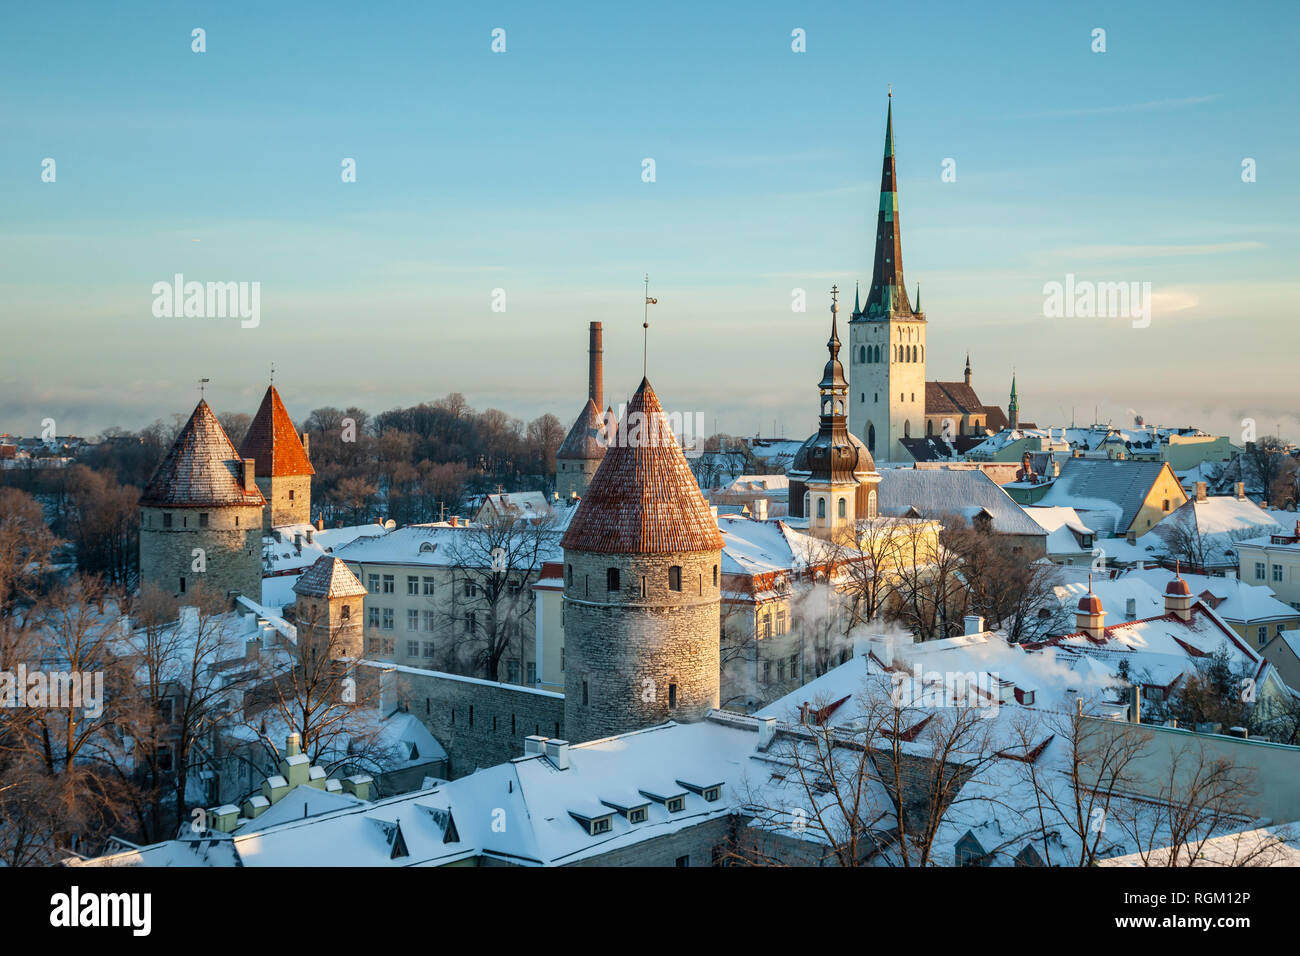 Iconic view of Tallinn old town on a winter morning, Estonia. Stock Photo